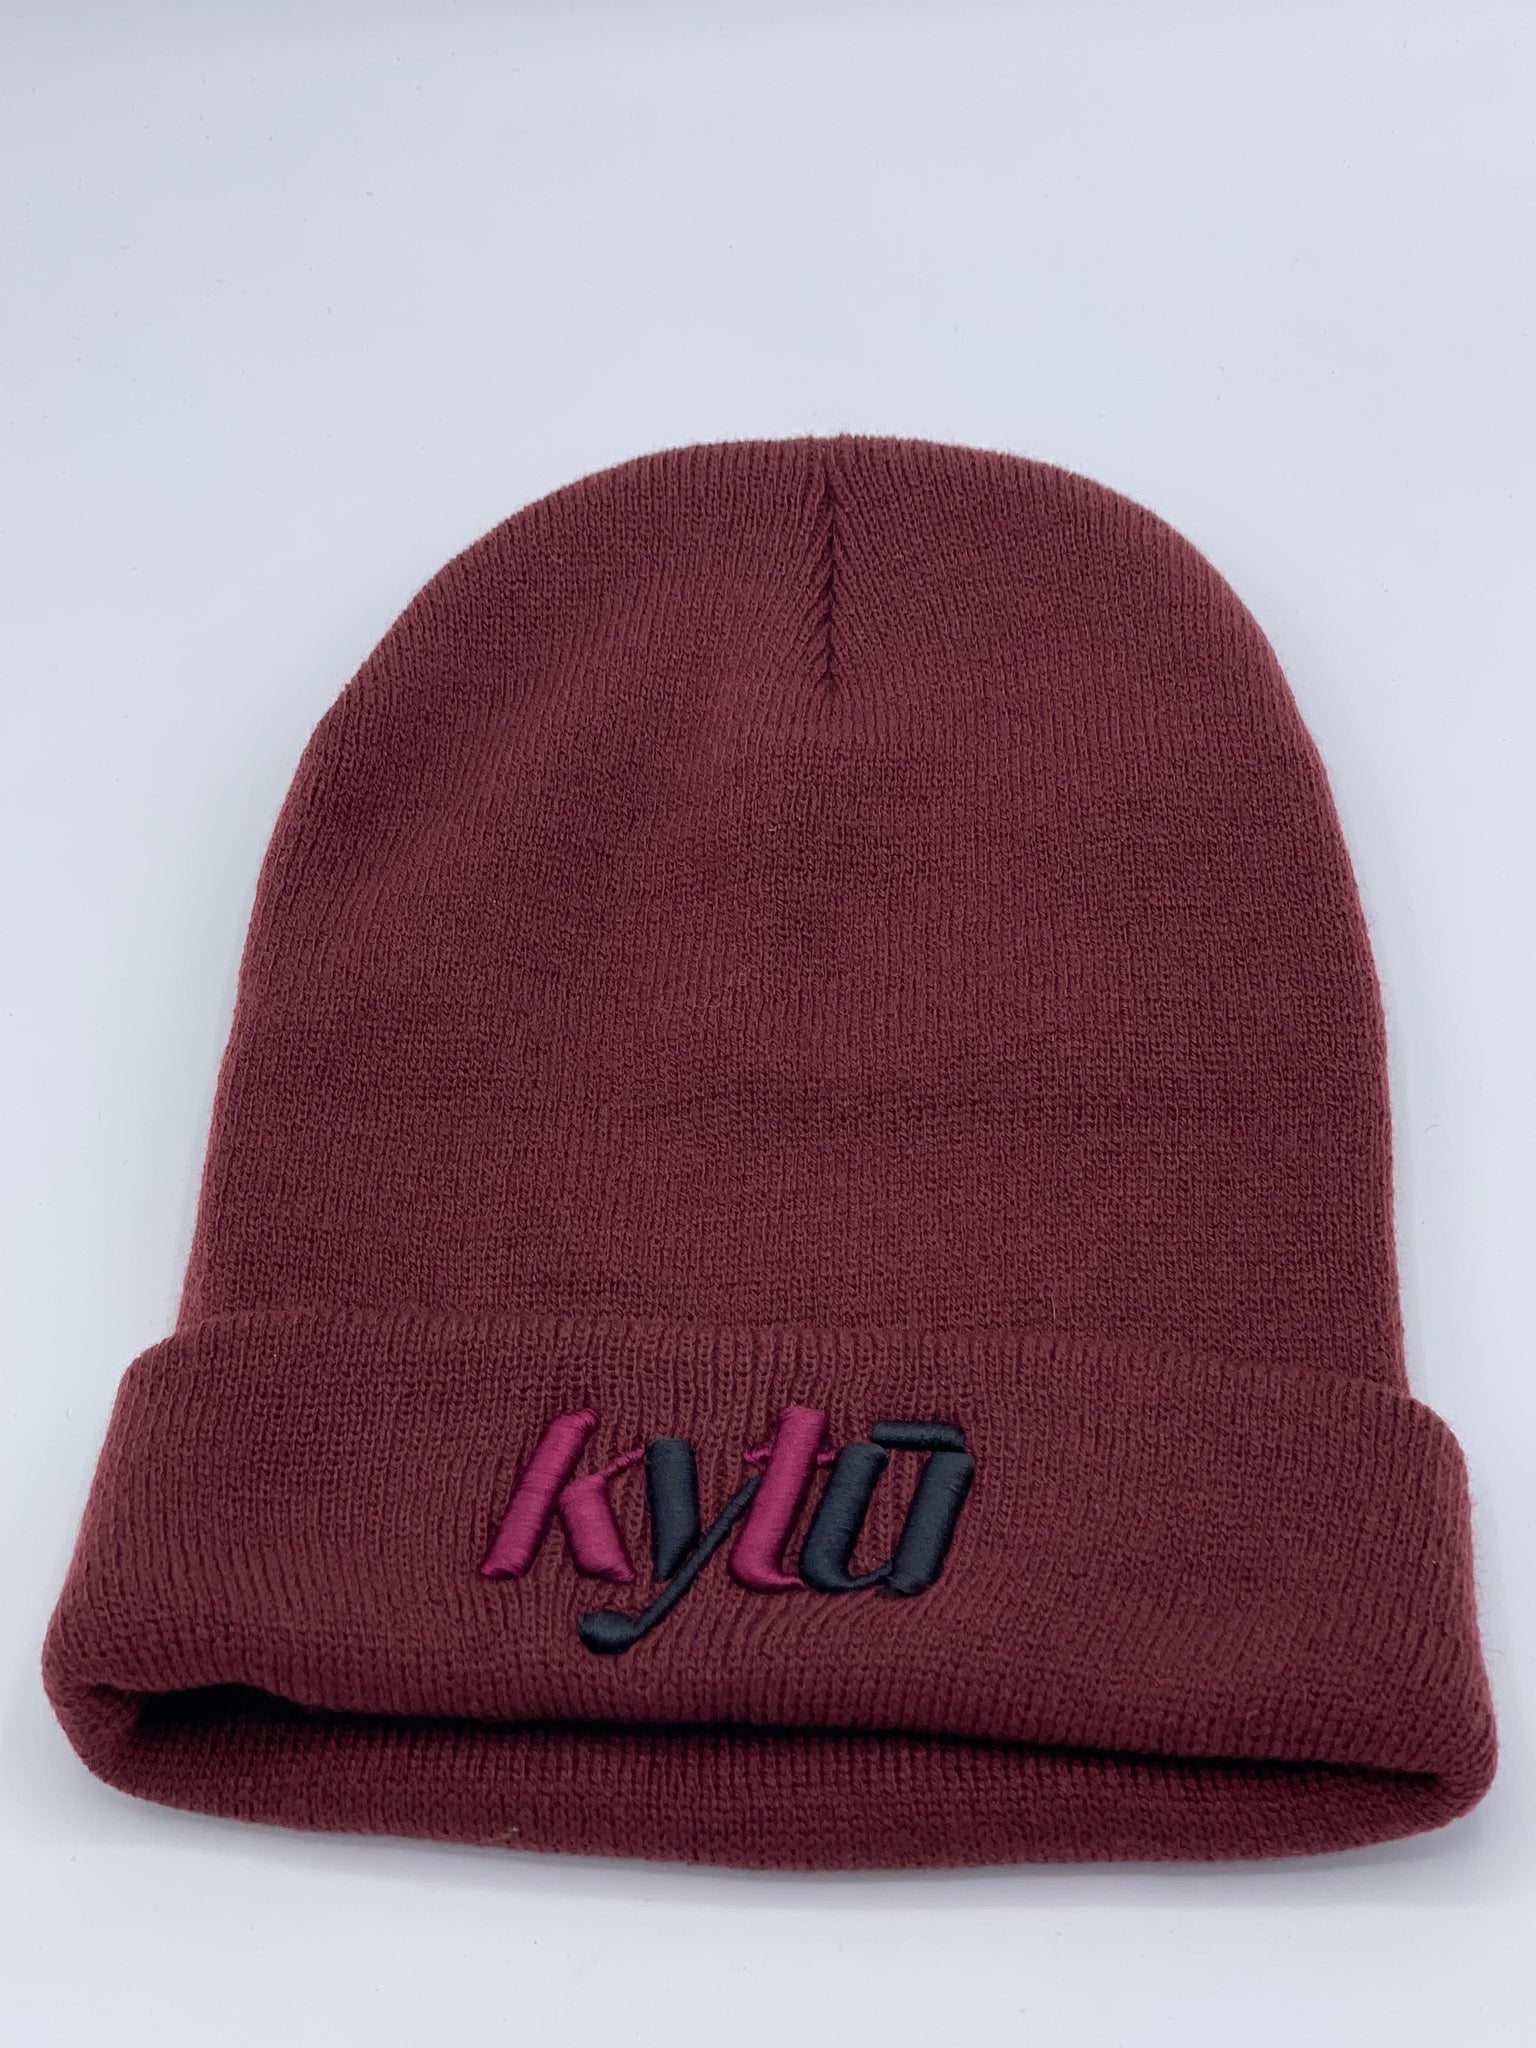 Two Tone Midweight Beanie